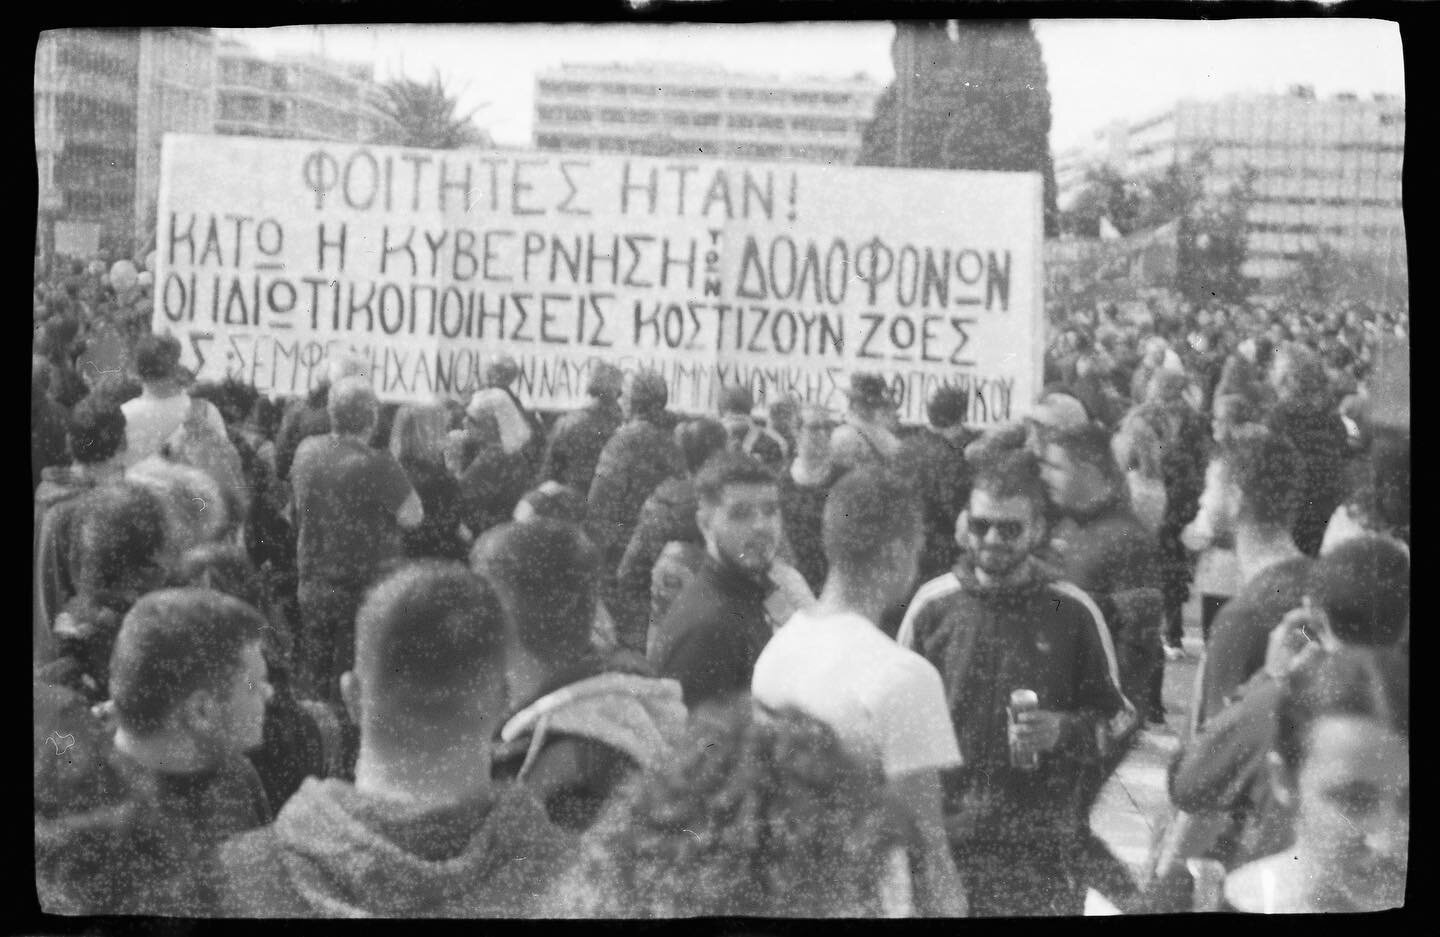 &Phi;&omicron;&iota;&tau;&eta;&tau;έ&sigmaf; Ή&tau;&alpha;&nu;, &Sigma;ύ&nu;&tau;&alpha;&gamma;&mu;&alpha;, 8 &Mu;&alpha;&rho;&tau;ί&omicron;&upsilon; 2023

&ldquo;They were students.
Down with this government of murderers - 
privatisation costs live